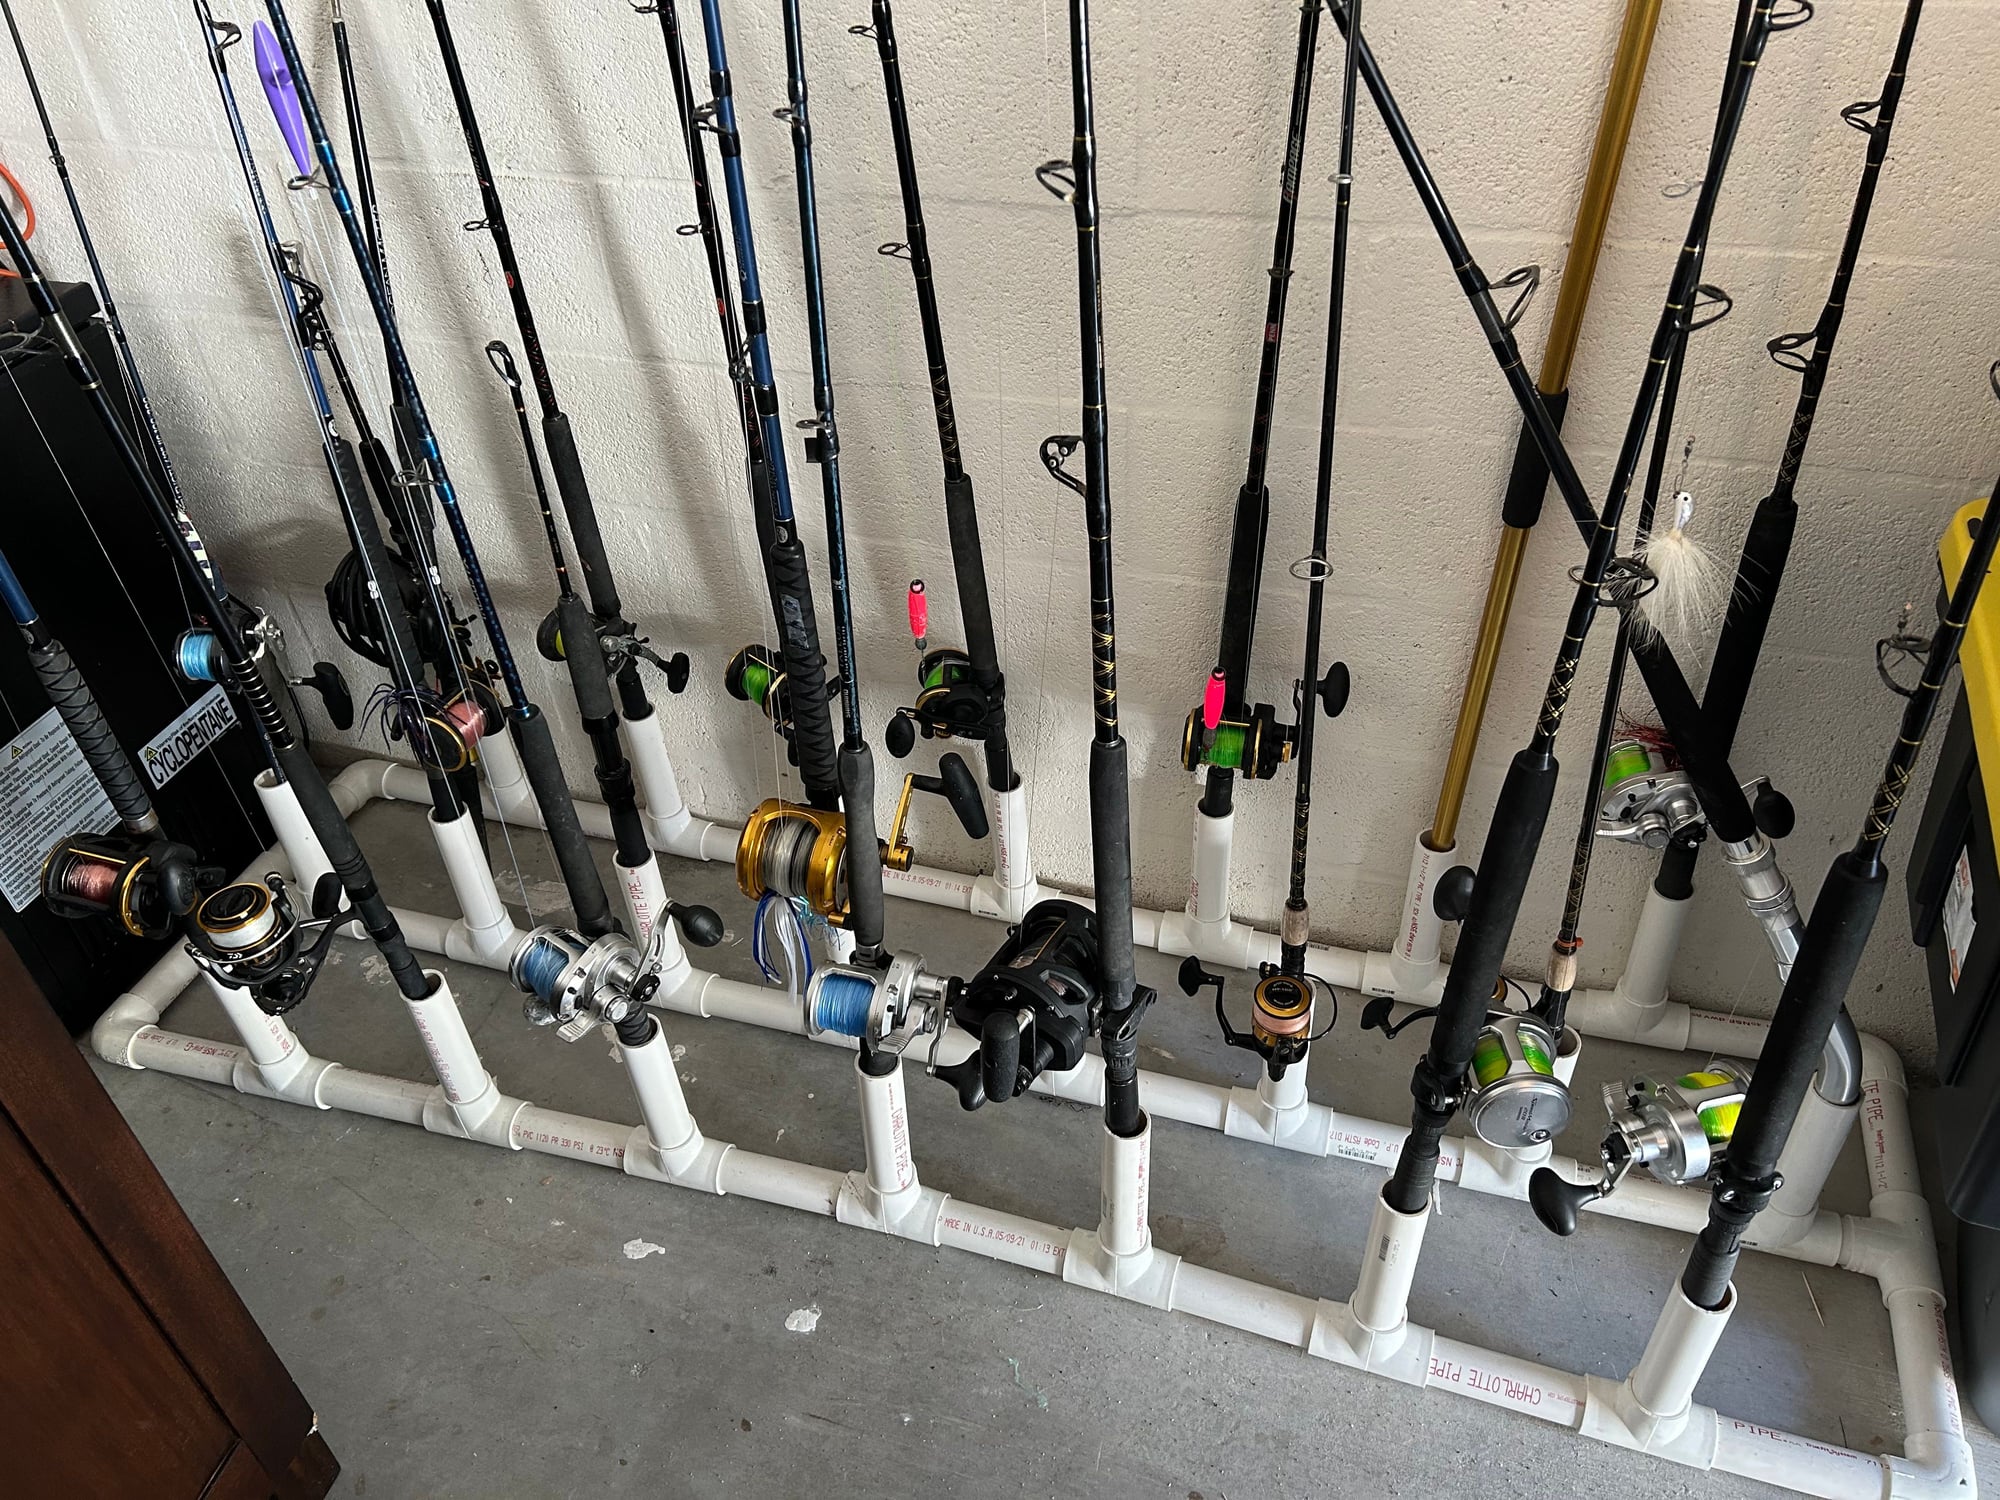 Selling all saltwater fishing gear - The Hull Truth - Boating and Fishing  Forum